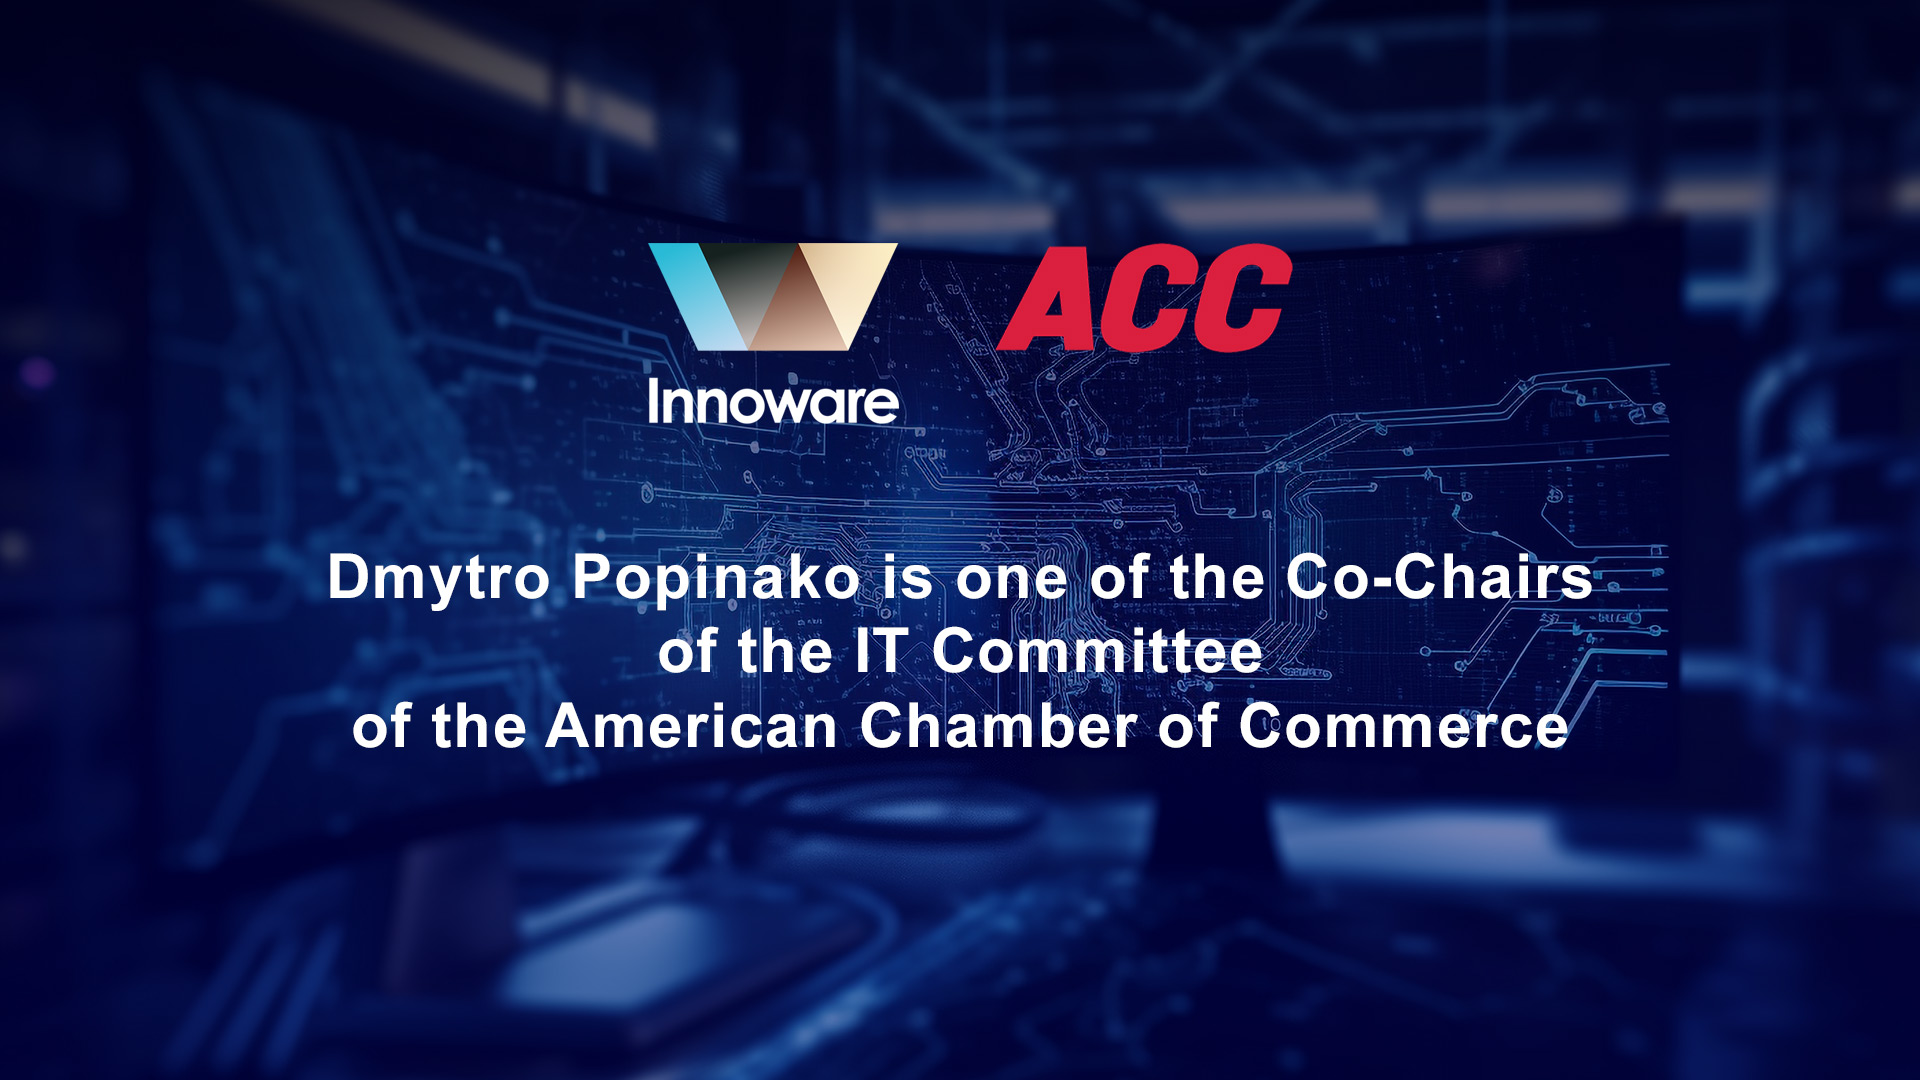 Dmytro Popinako is one of the Сo-Сhairs of the IT Committee of the American Chamber of Commerce